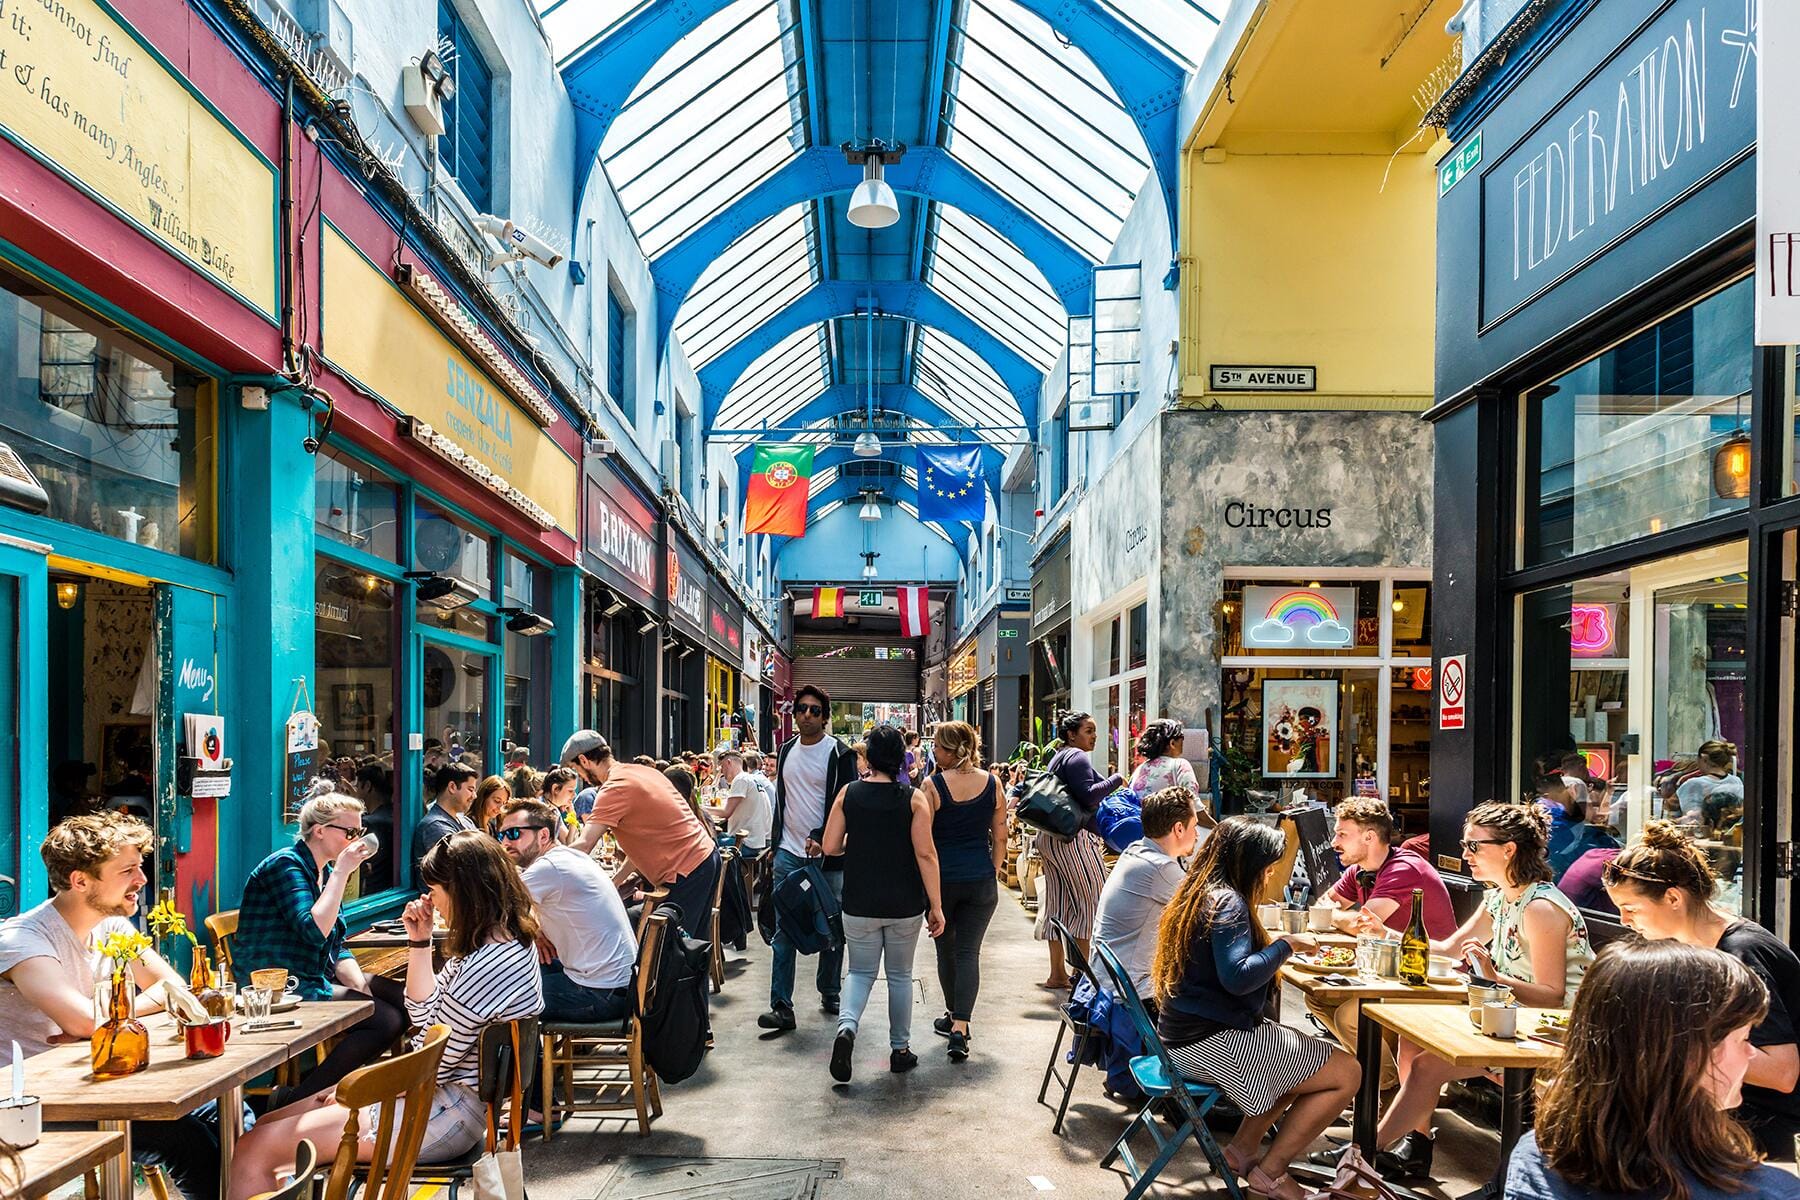 <a href='https://www.fodors.com/world/europe/england/london/experiences/news/photos/the-11-best-street-markets-to-visit-in-london#'>From &quot;The 11 Best Street Markets to Visit in London: Brixton Village&quot;</a>